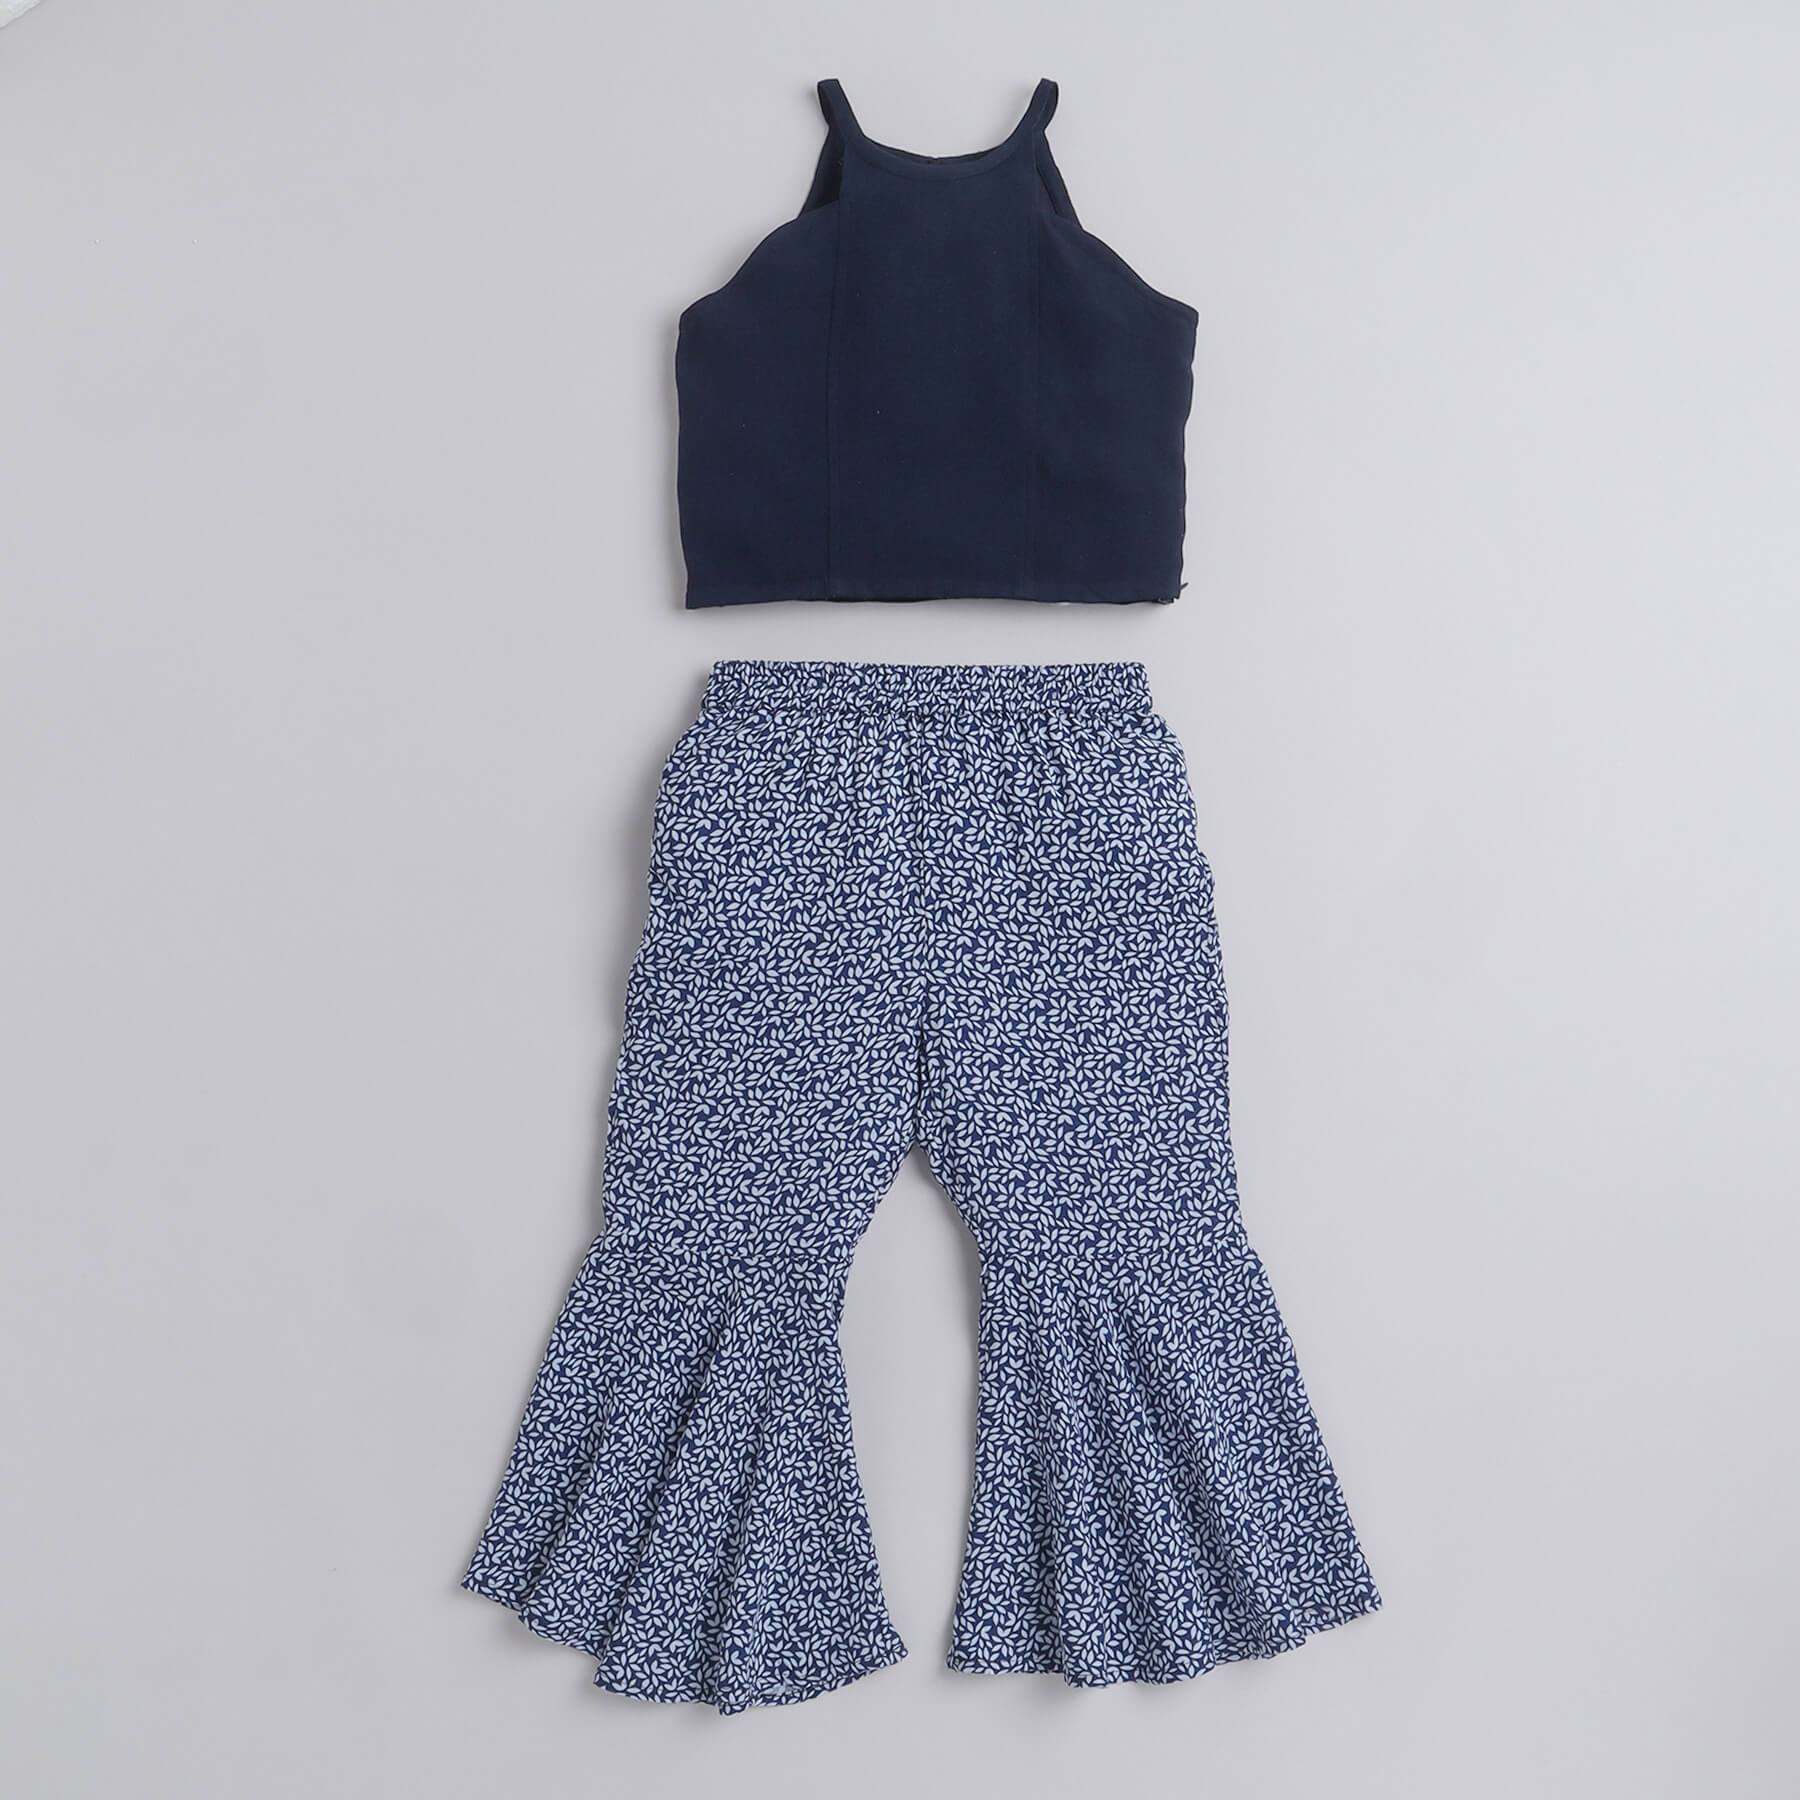 Taffykids solid crop top with printed bell bottom pant set-Navy/White